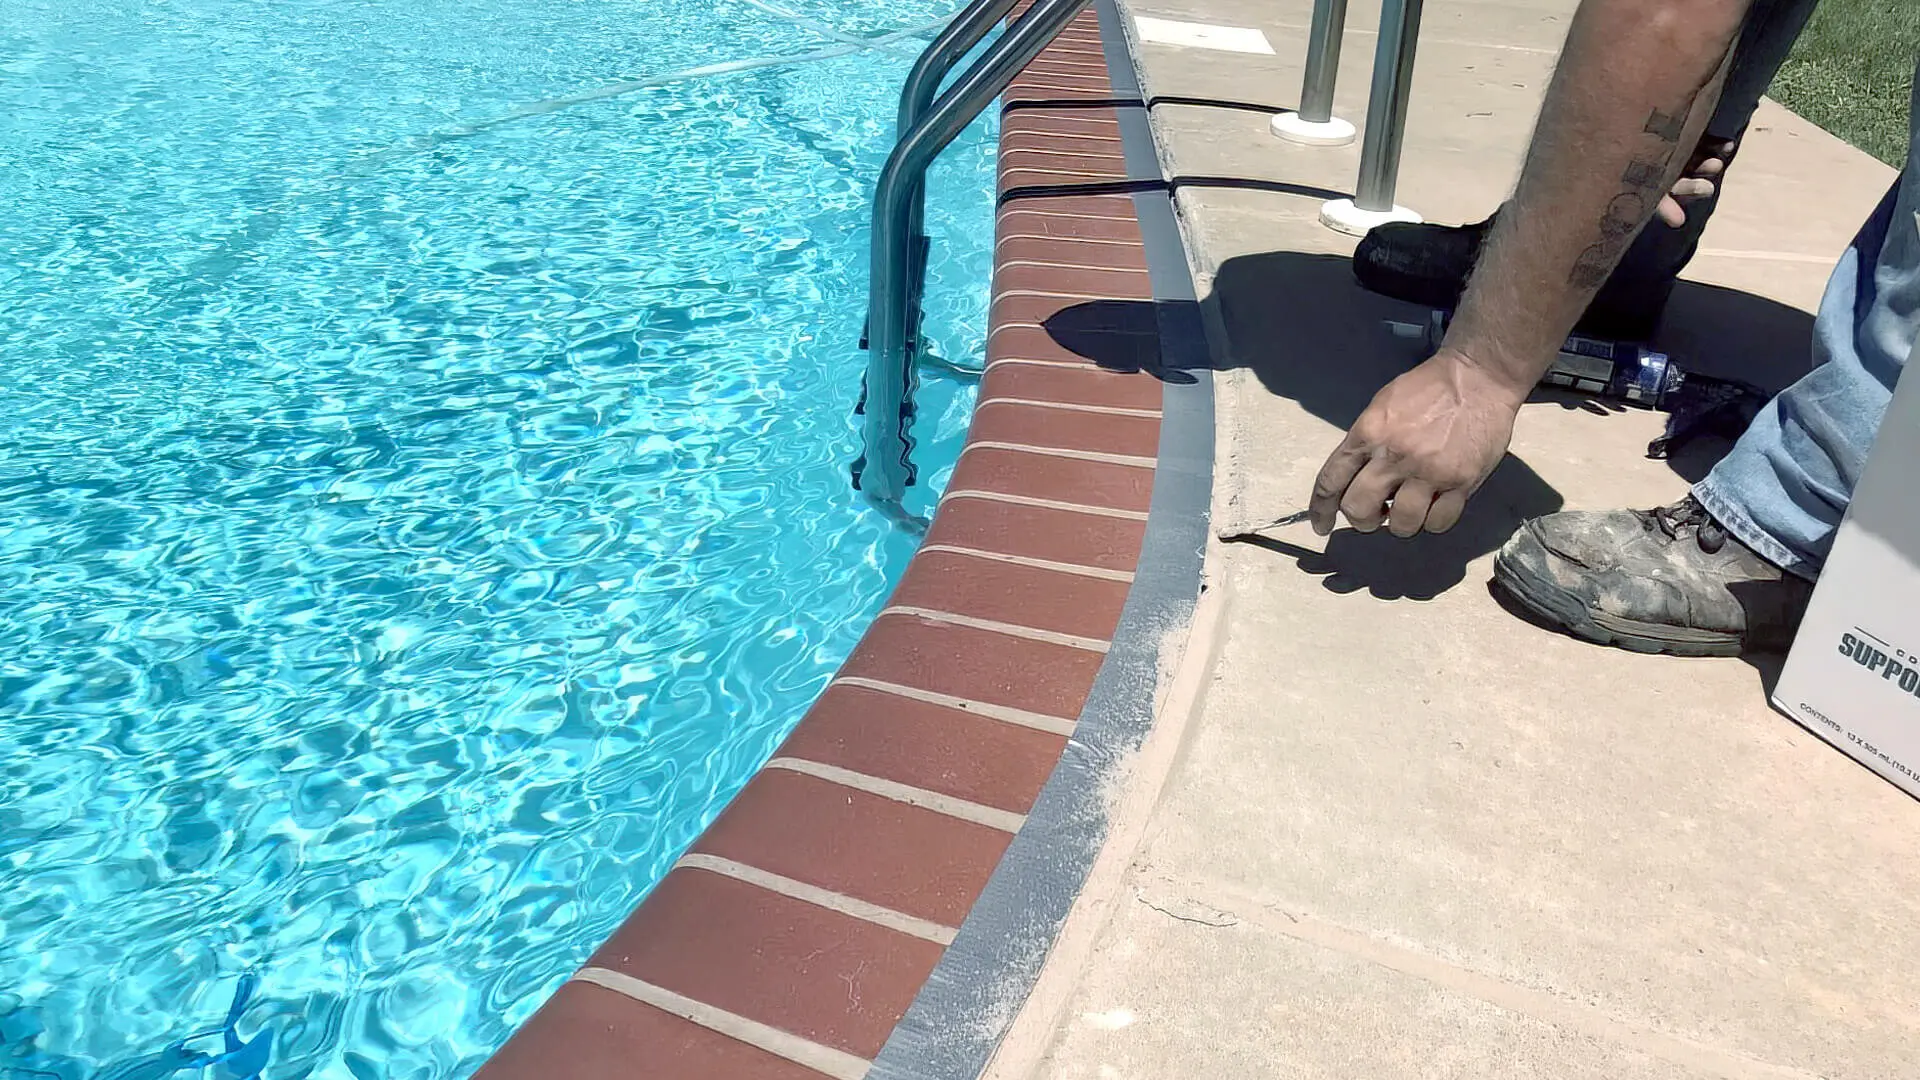 Need To Repair A Pool Deck? Here's How ‐ The Pool Co